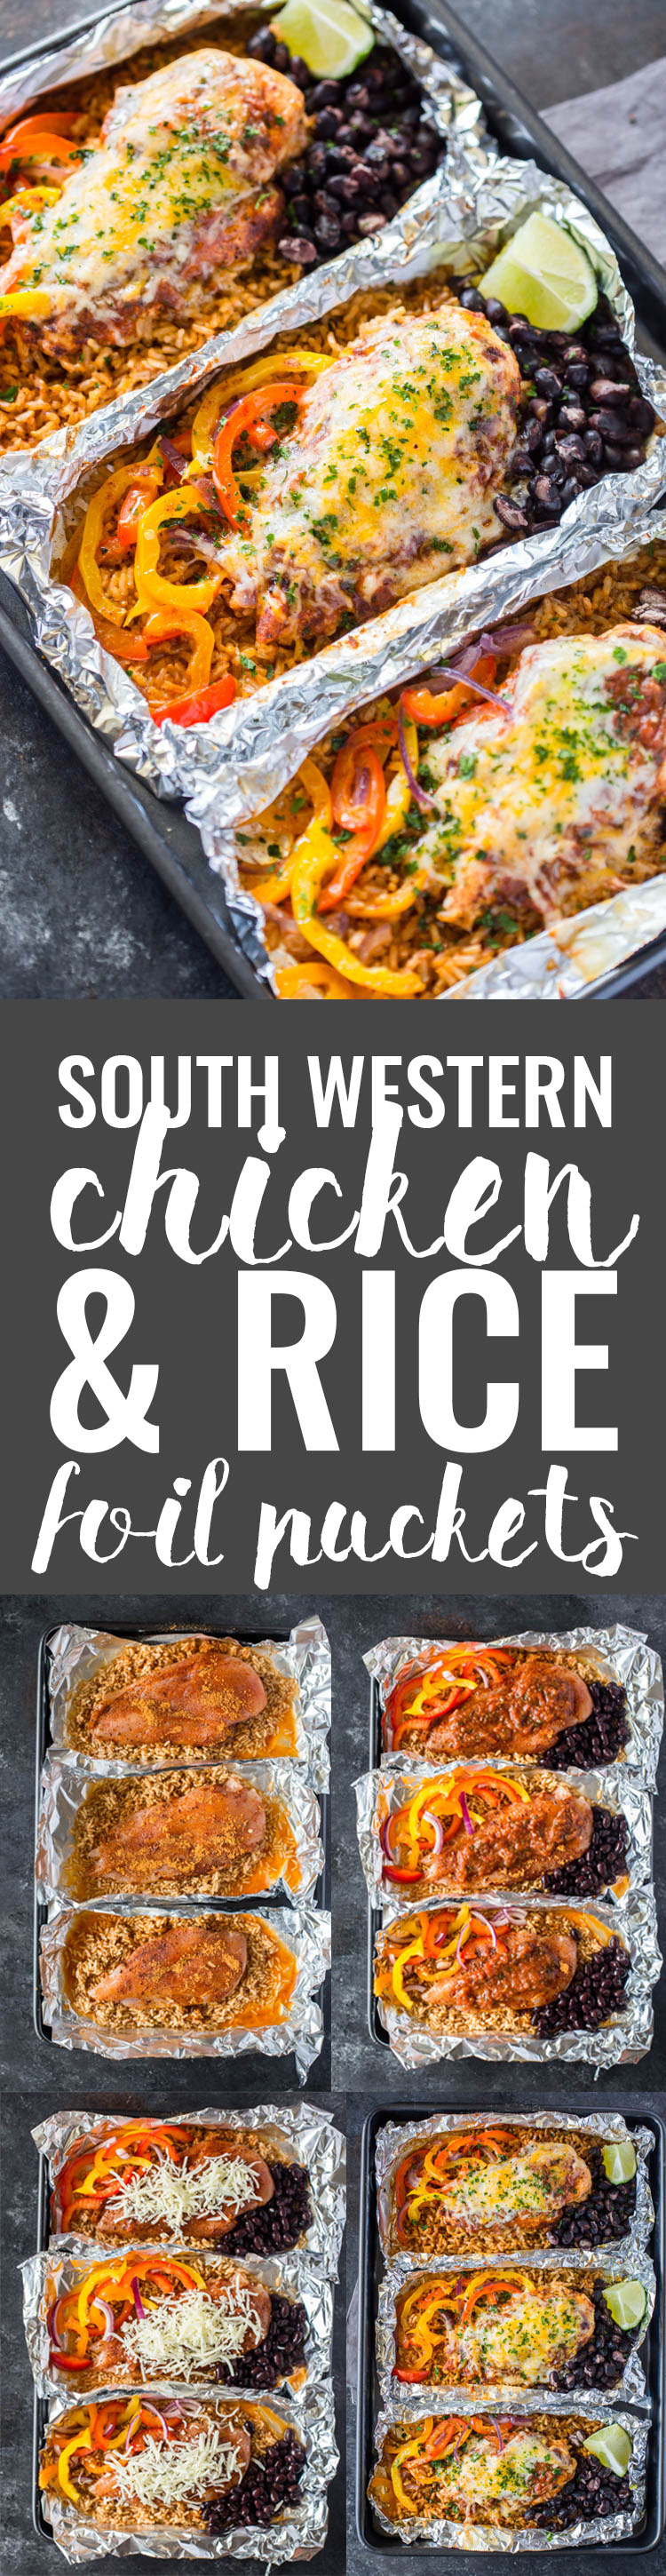 Southwestern Chicken & Rice Foil Packets 